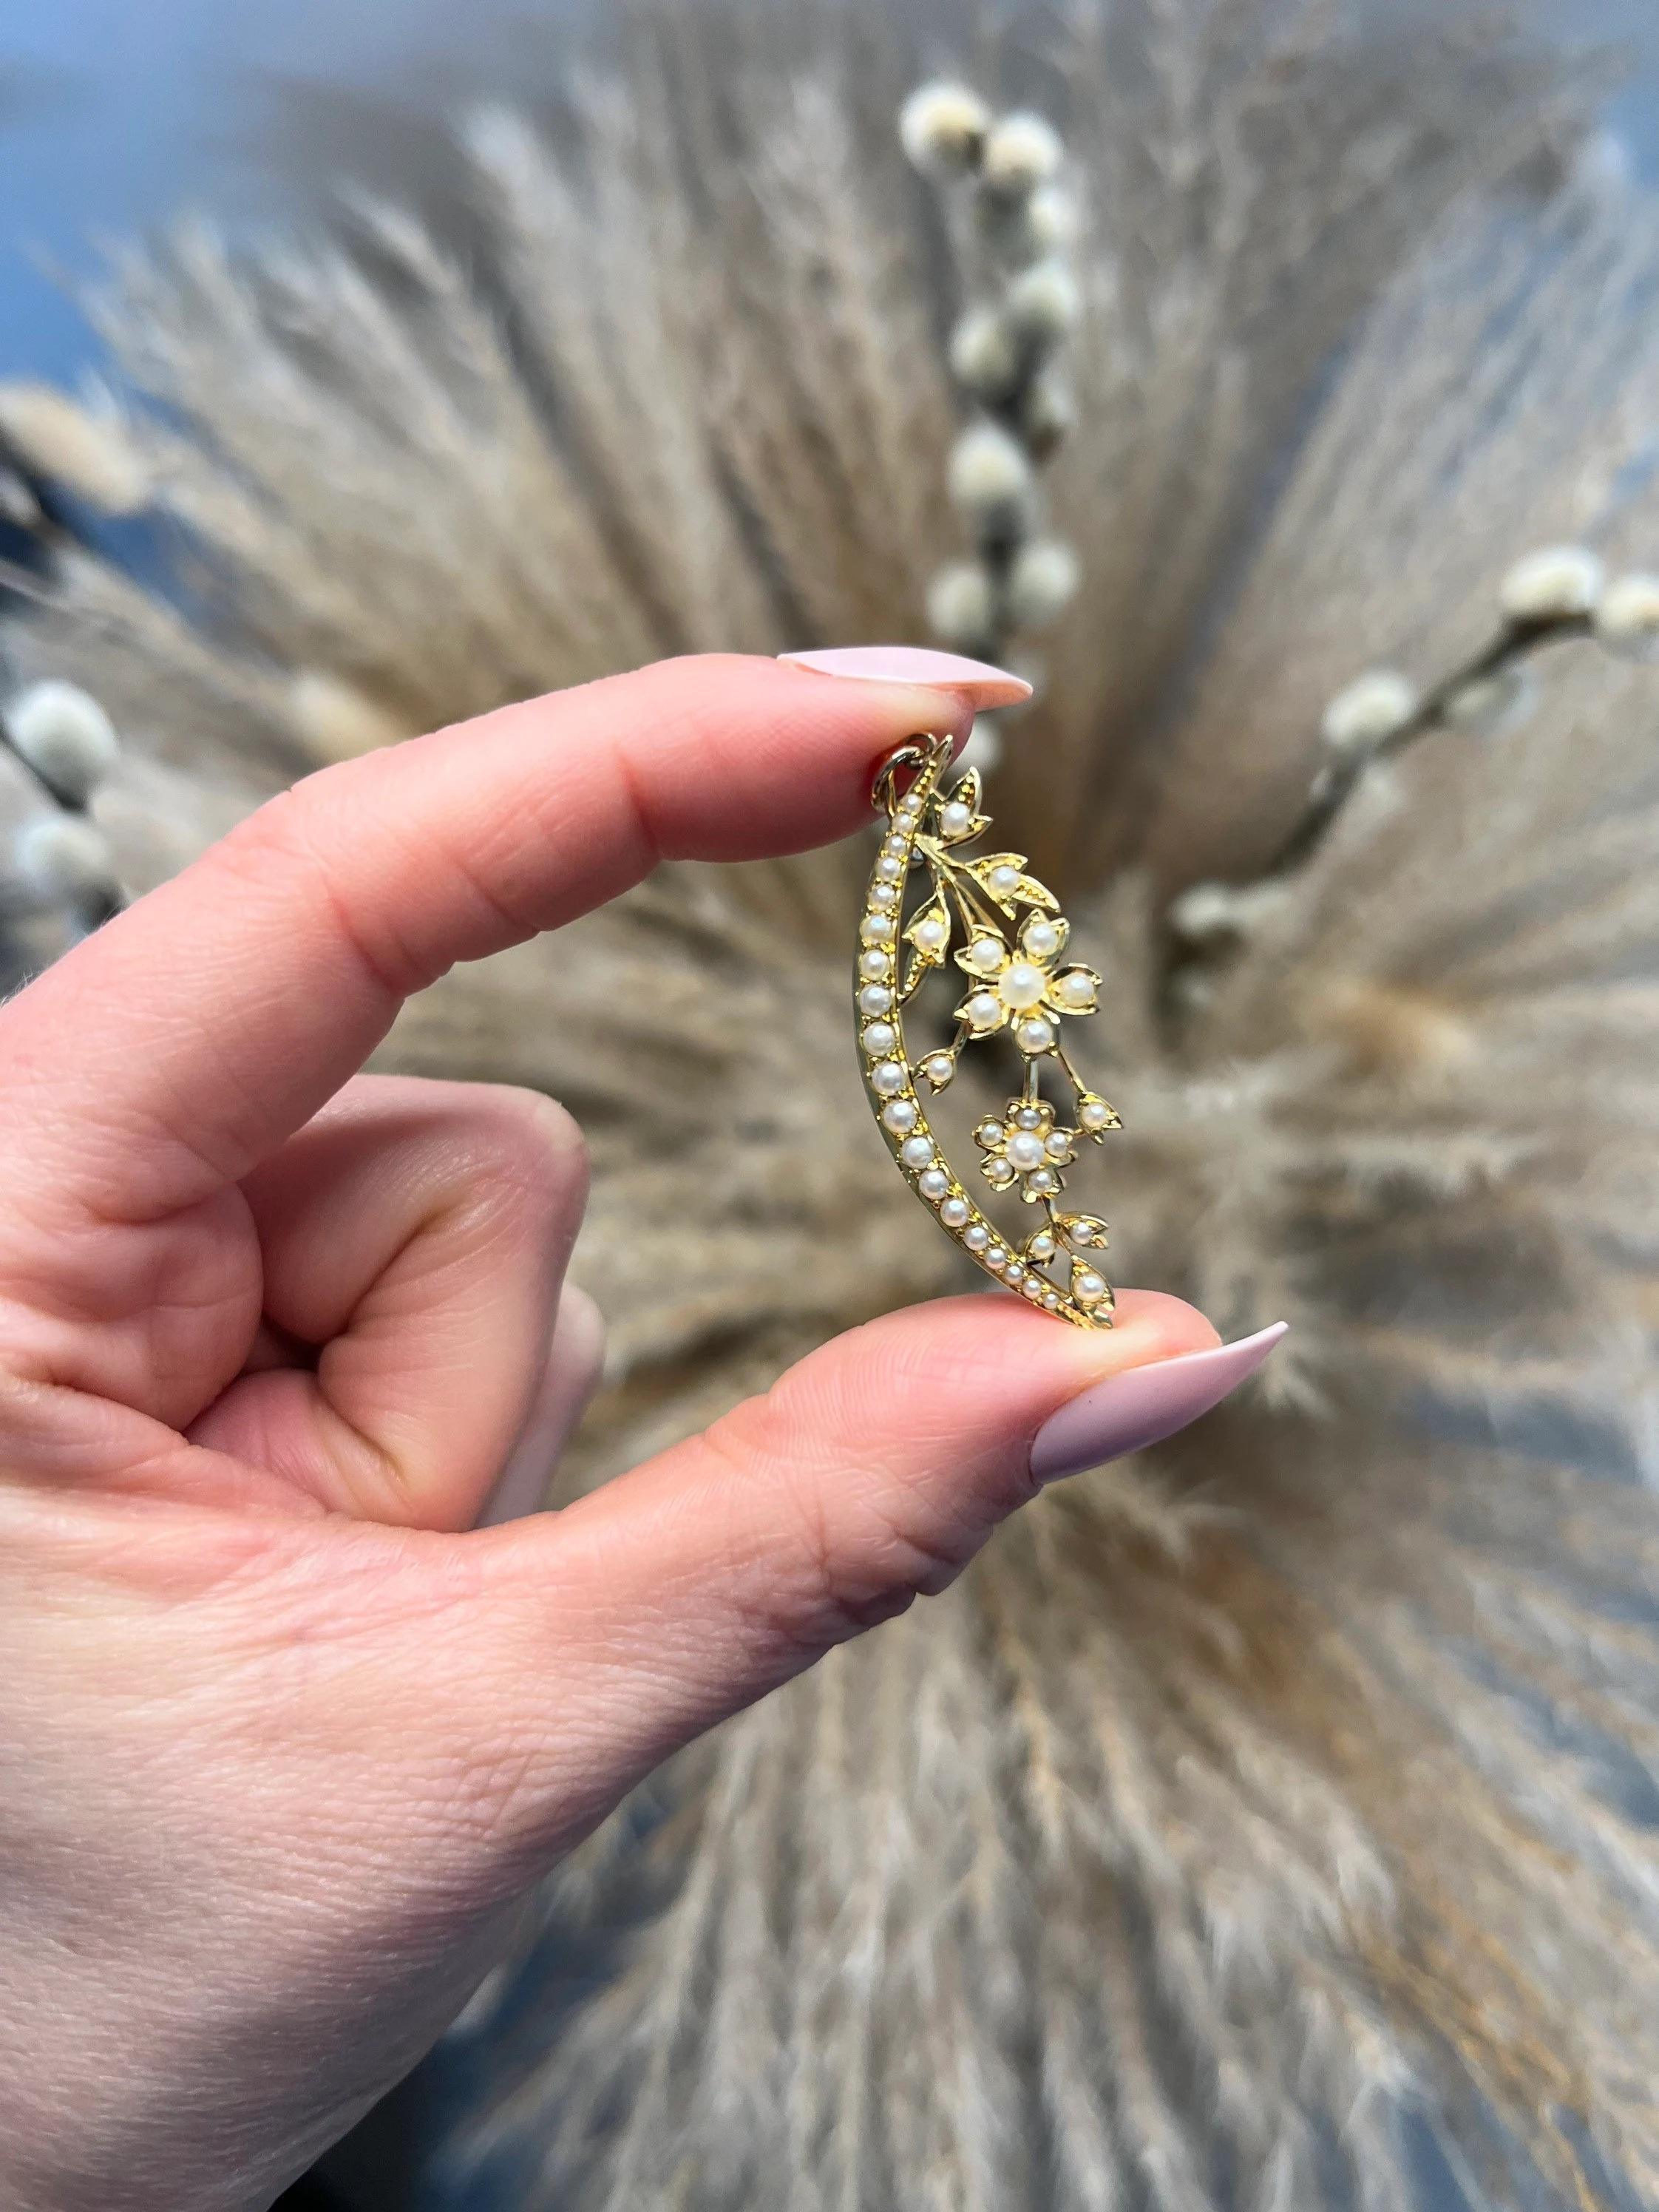 Antique Crescent Pendant 

15ct Gold

Circa 1900

Beautiful, Edwardian crescent moon pendant. 
Set with a lovely single row of graduated, natural seed pearls. The crescent is beautifully decorated with gorgeous, gold & seed pearl flowers. Such a